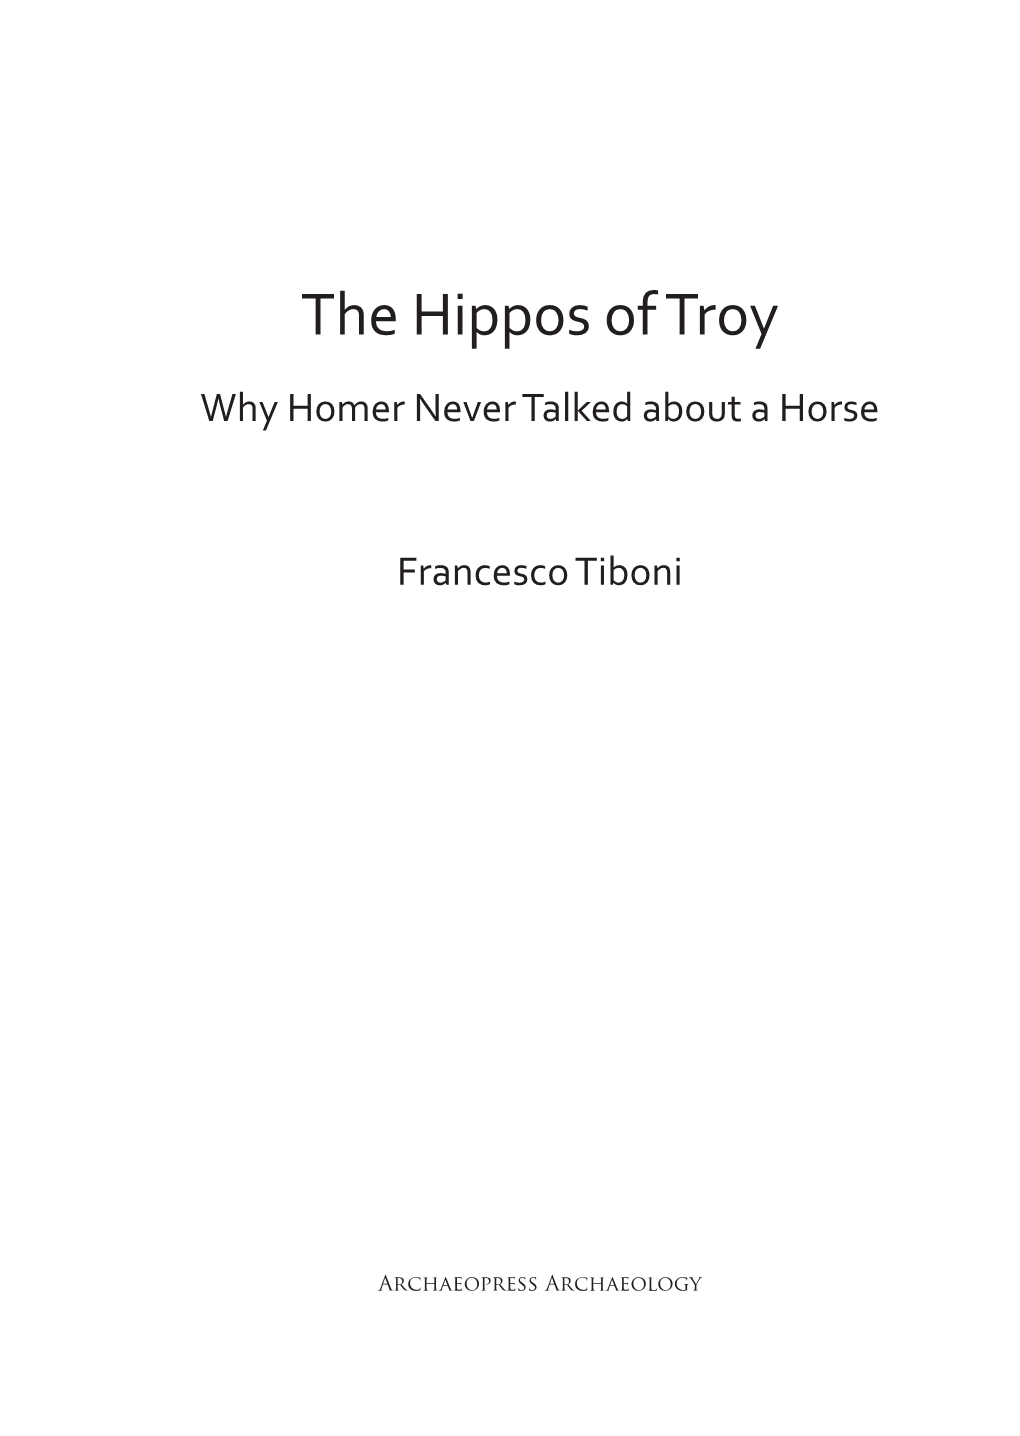 The Hippos of Troy Why Homer Never Talked About a Horse